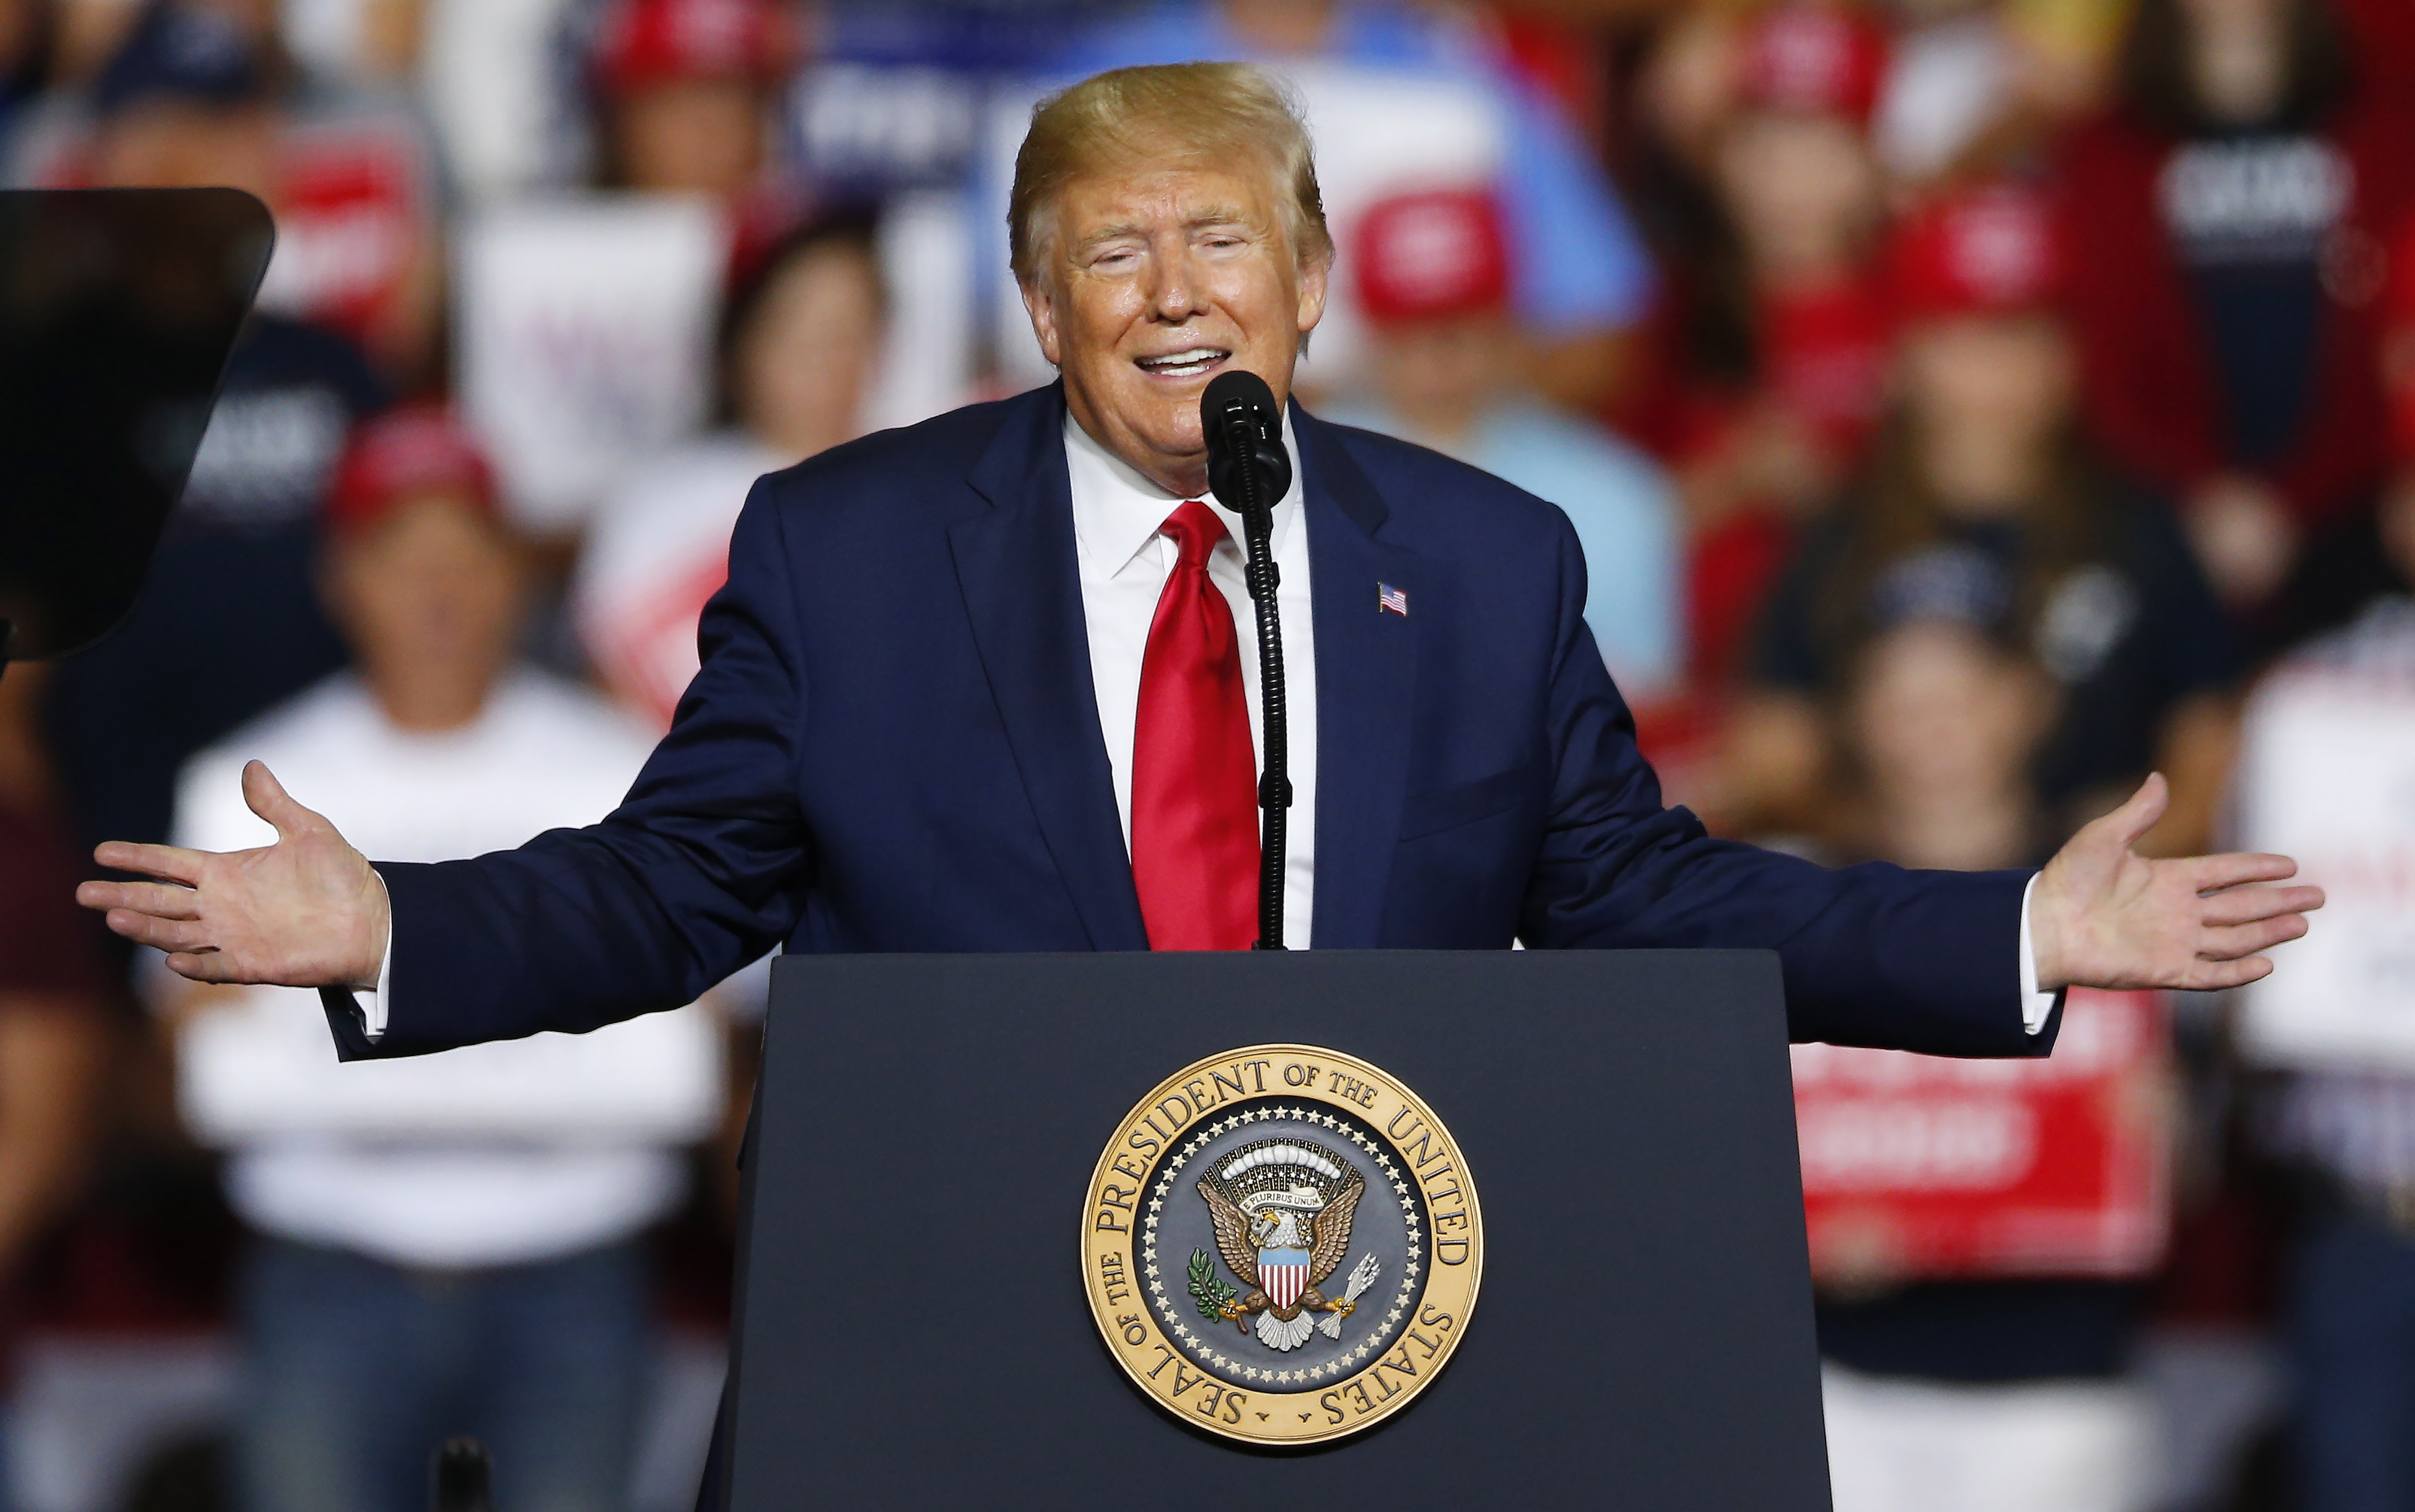 epa07775679 United States President Donald J. Trump speaks during a rally inside the Southern New Hampshire University Arena in Manchester, New Hampshire, USA 15 August 2019. The Nation's first Presidential Primary will take place in New Hampshire in 180 days on 11 February 2020.  EPA/CJ GUNTHER